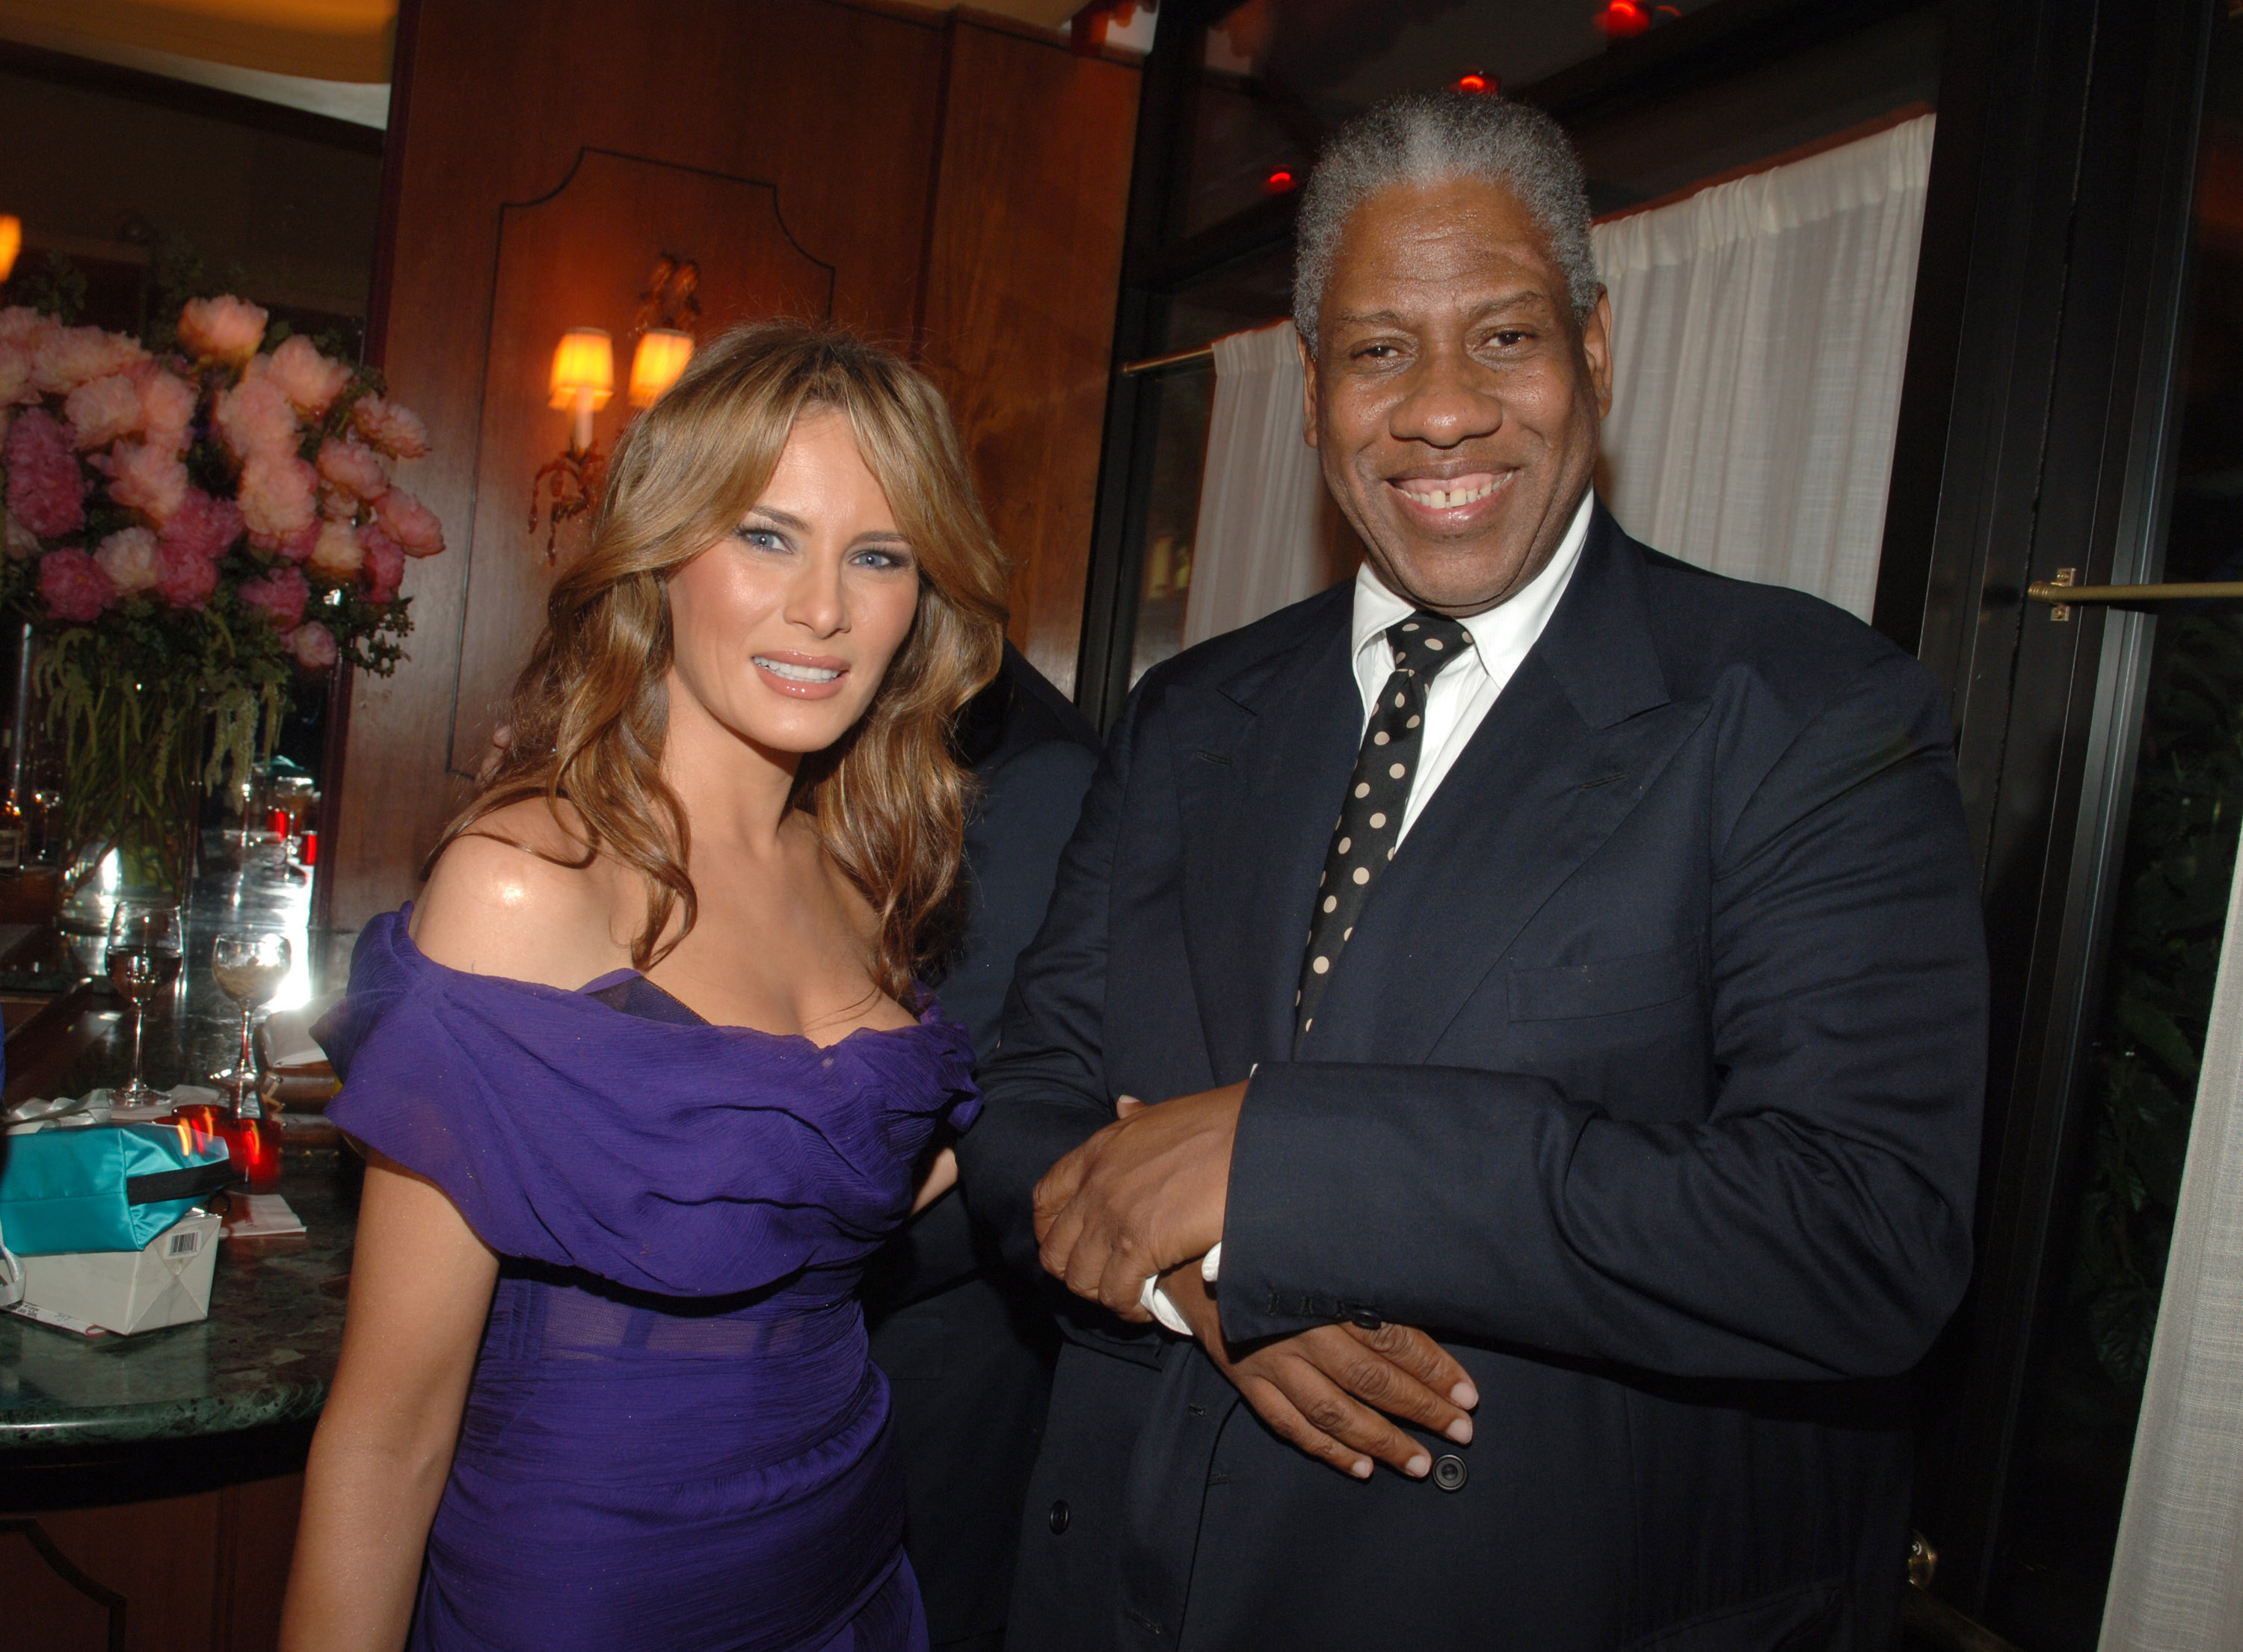 Melania Trump and Andre Leon Talley during MAC Cosmetics Hosts Launch Party for Andre Leon Talley's New Book, "A.L.T. 365" at La Grenouille in New York City, New York, United States. (Photo by Stephen Lovekin/WireImage) (Stephen Lovekin—WireImage)